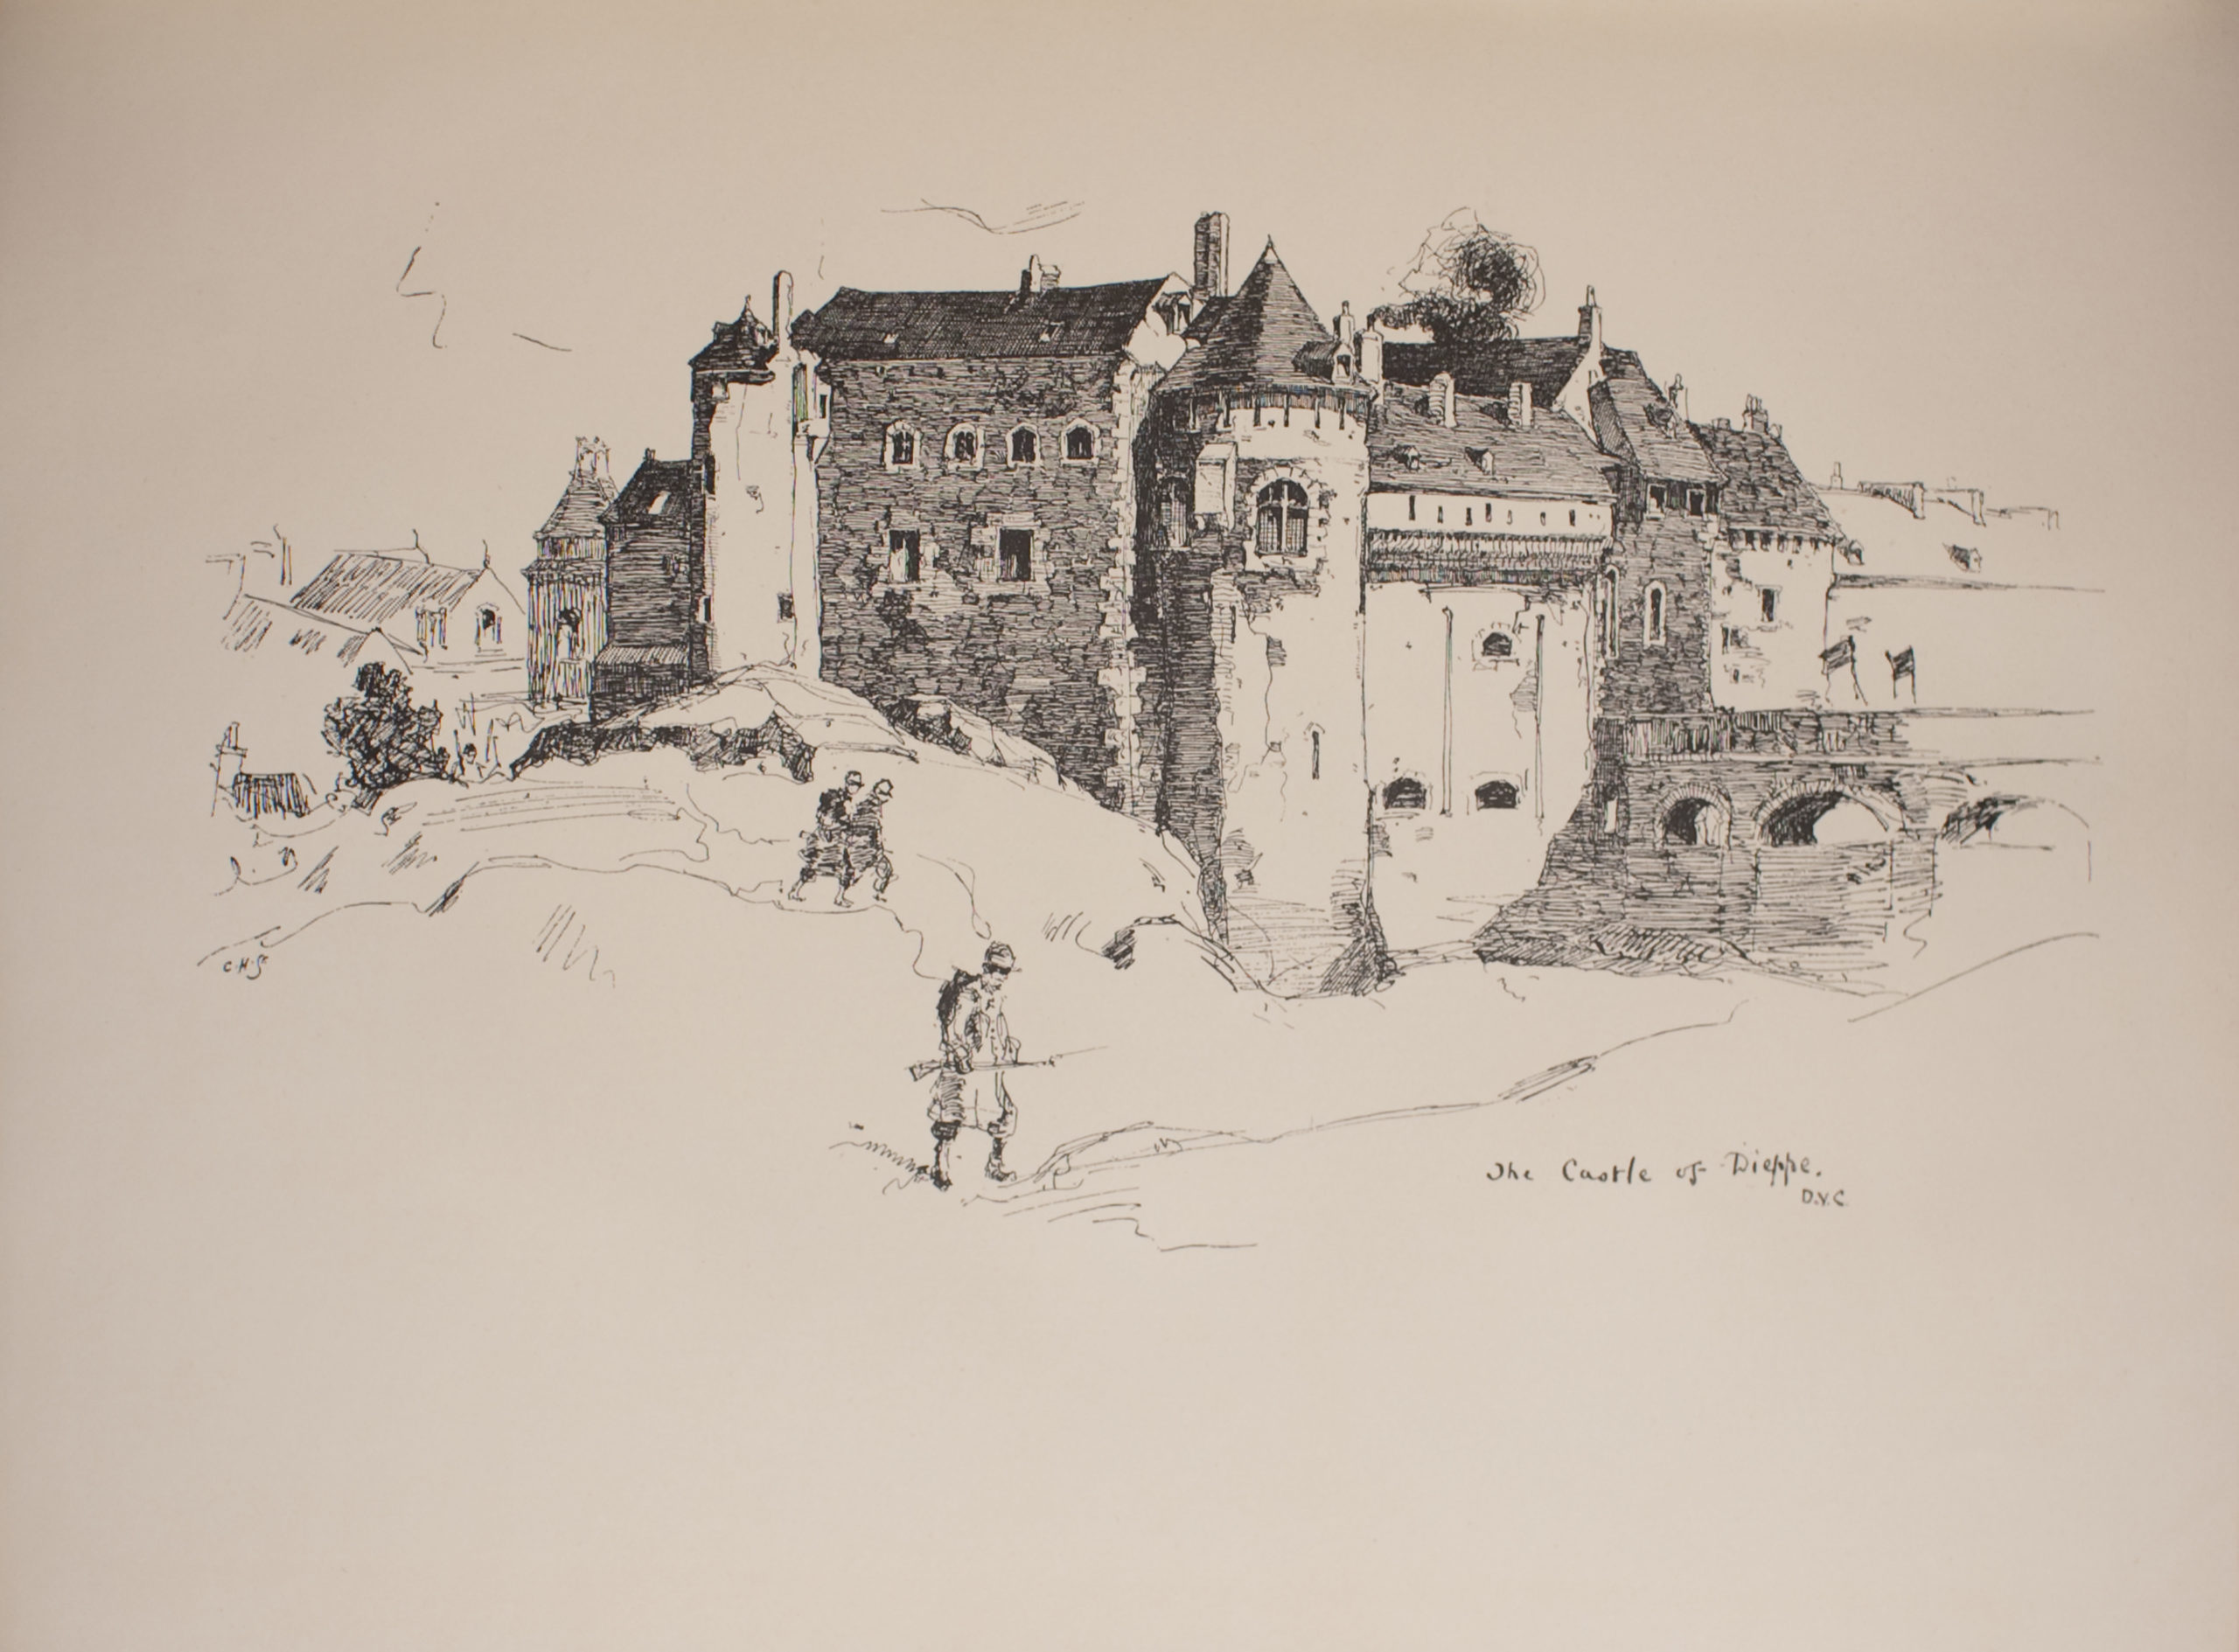 Image is of a castle with a moat on a hilly landscape A round tower is in the centre of the image dividing it in half horizontally It has two arched windows There is a smoking chimney to the right of the tower To the left there is another round tower it is at the back of the building In the left background are the outlines of several smaller buildings Most of the castle has arched windows though a few are rectangular There are some noticeable cracks and paint chipping on the castle walls To the right of the centre tower is a bridge with three arches In the foreground are three figures wearing military regalia The figure in the centre foreground also has a weapon The background is open and undefined The name and artist of the image The Castle of Dieppe DYC are in the bottom right corner The engraver’s initials C H Sc are in the middle left The image is horizontally displayed